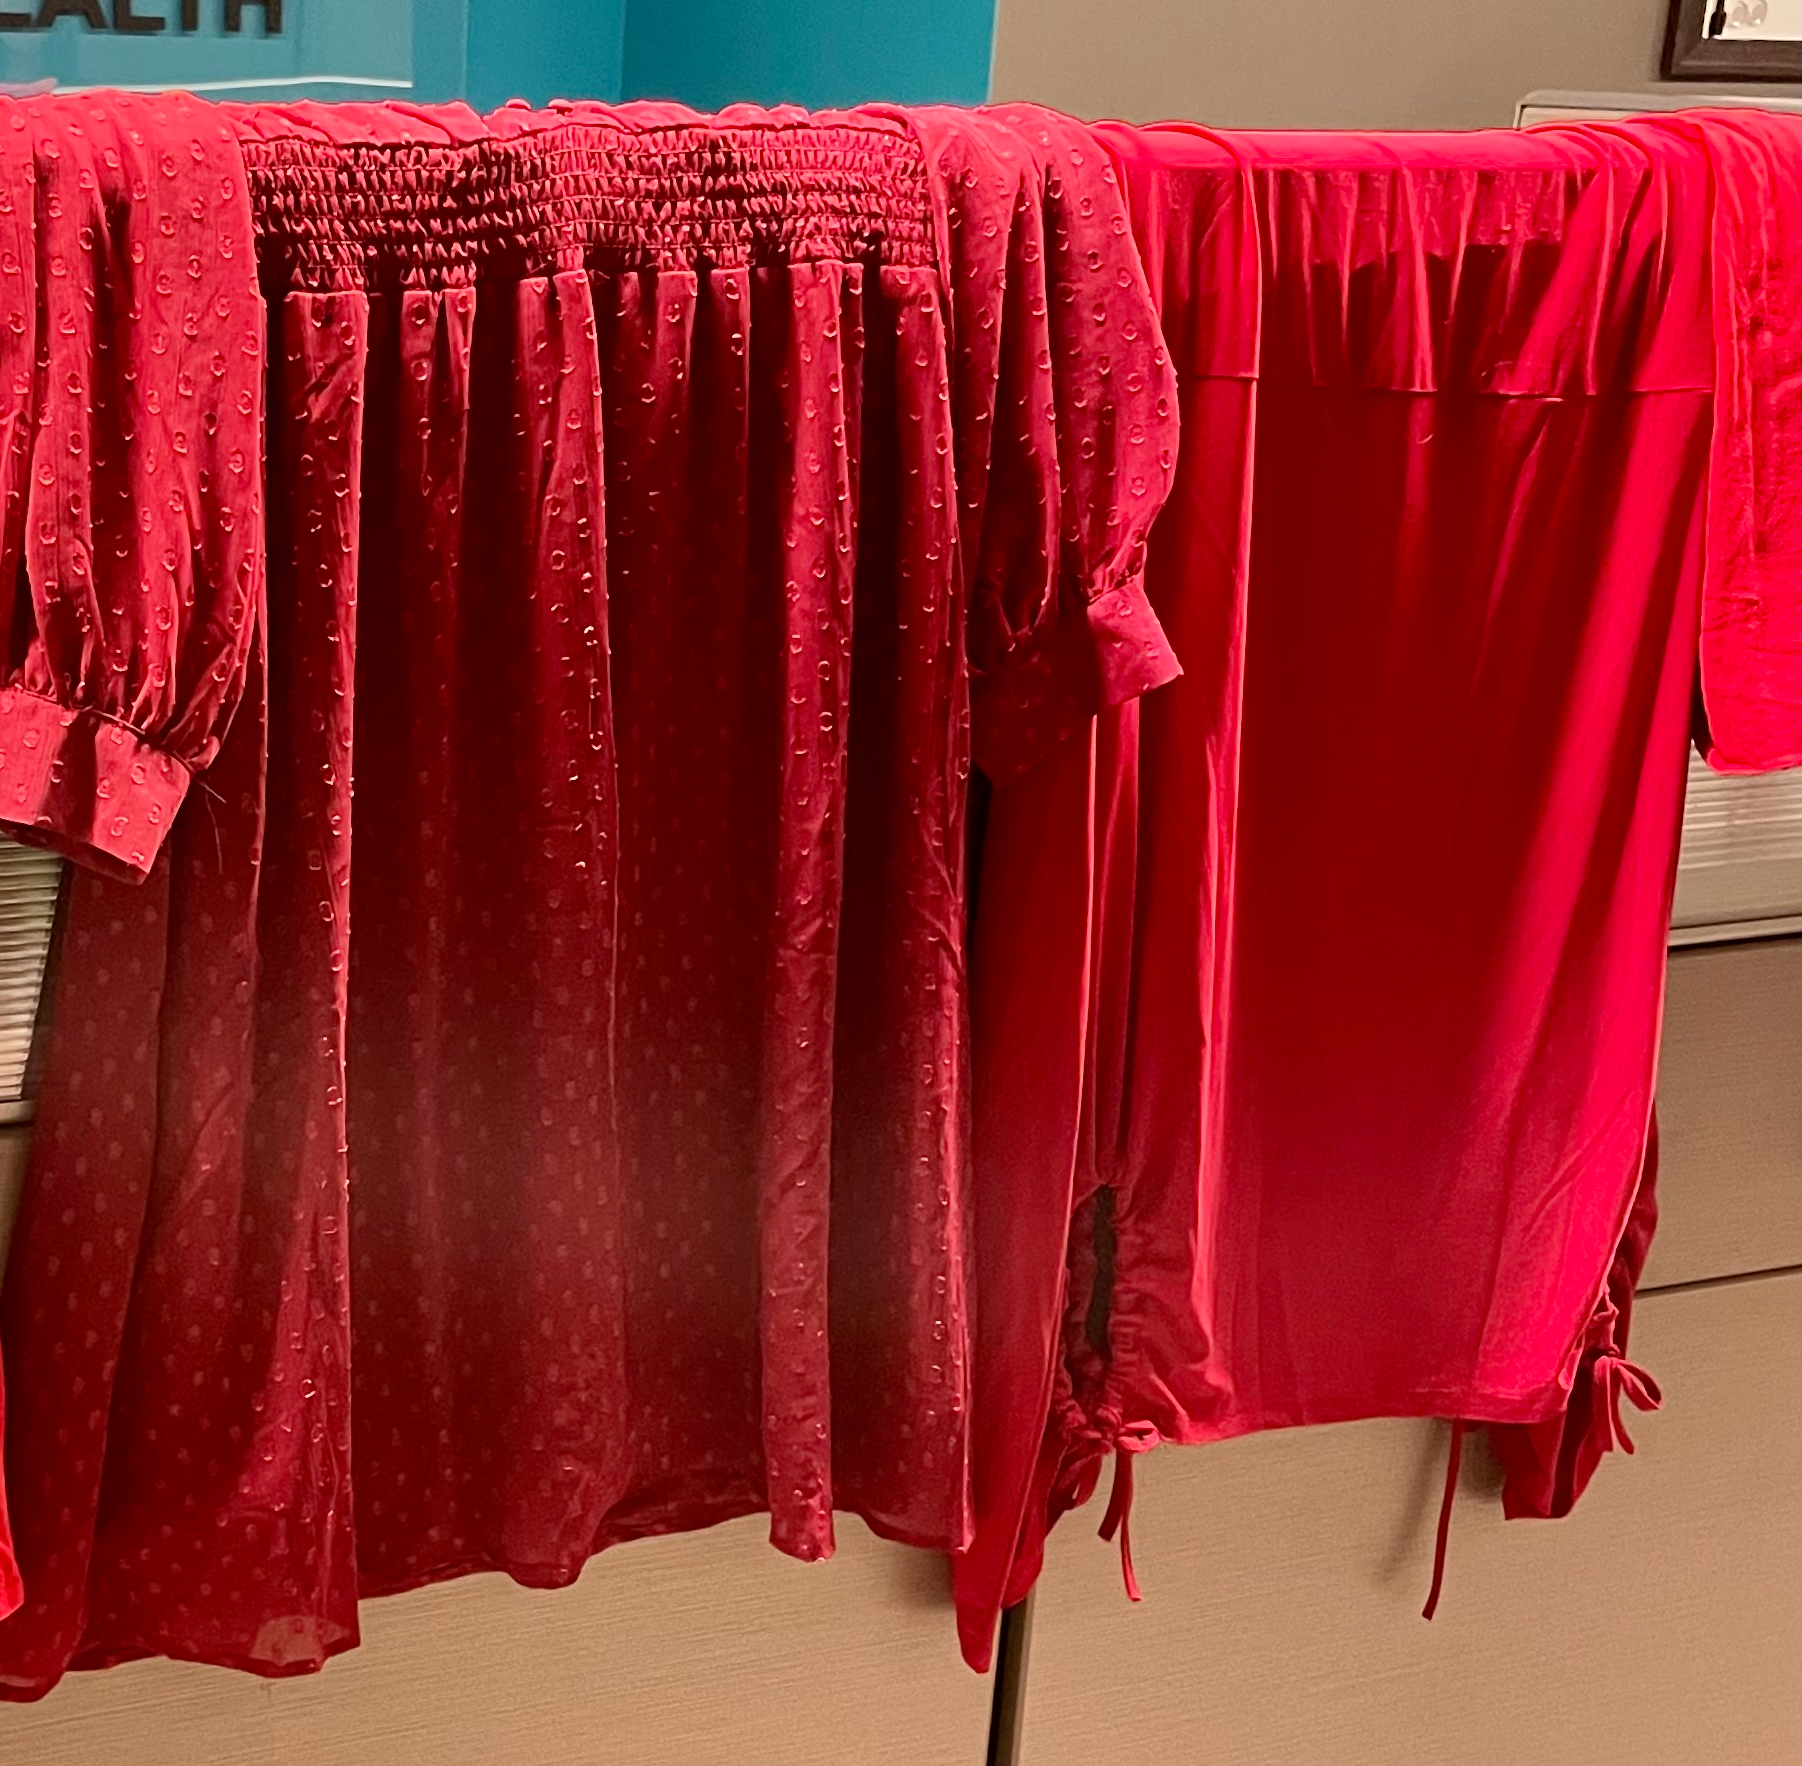 Red dresses hanging